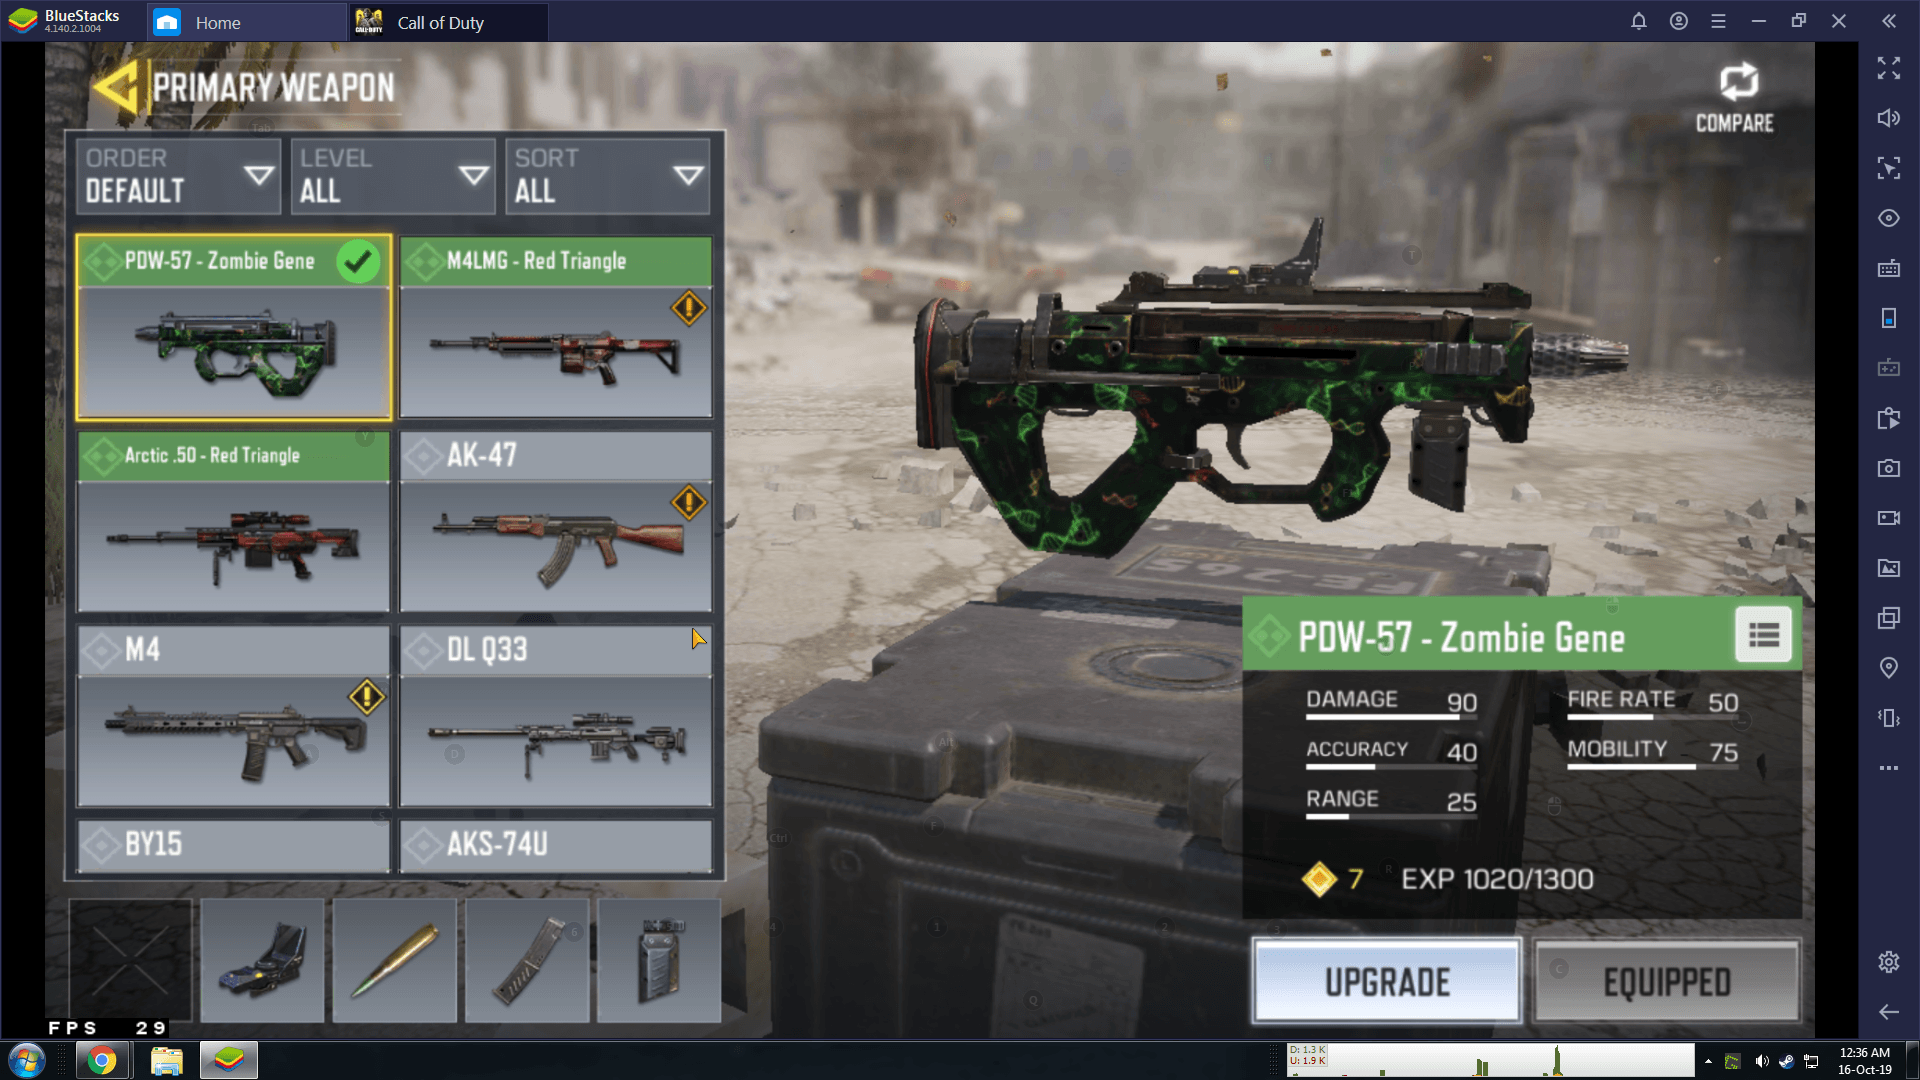 Free For All: The Hot New Game Mode in Call of Duty: Mobile on PC